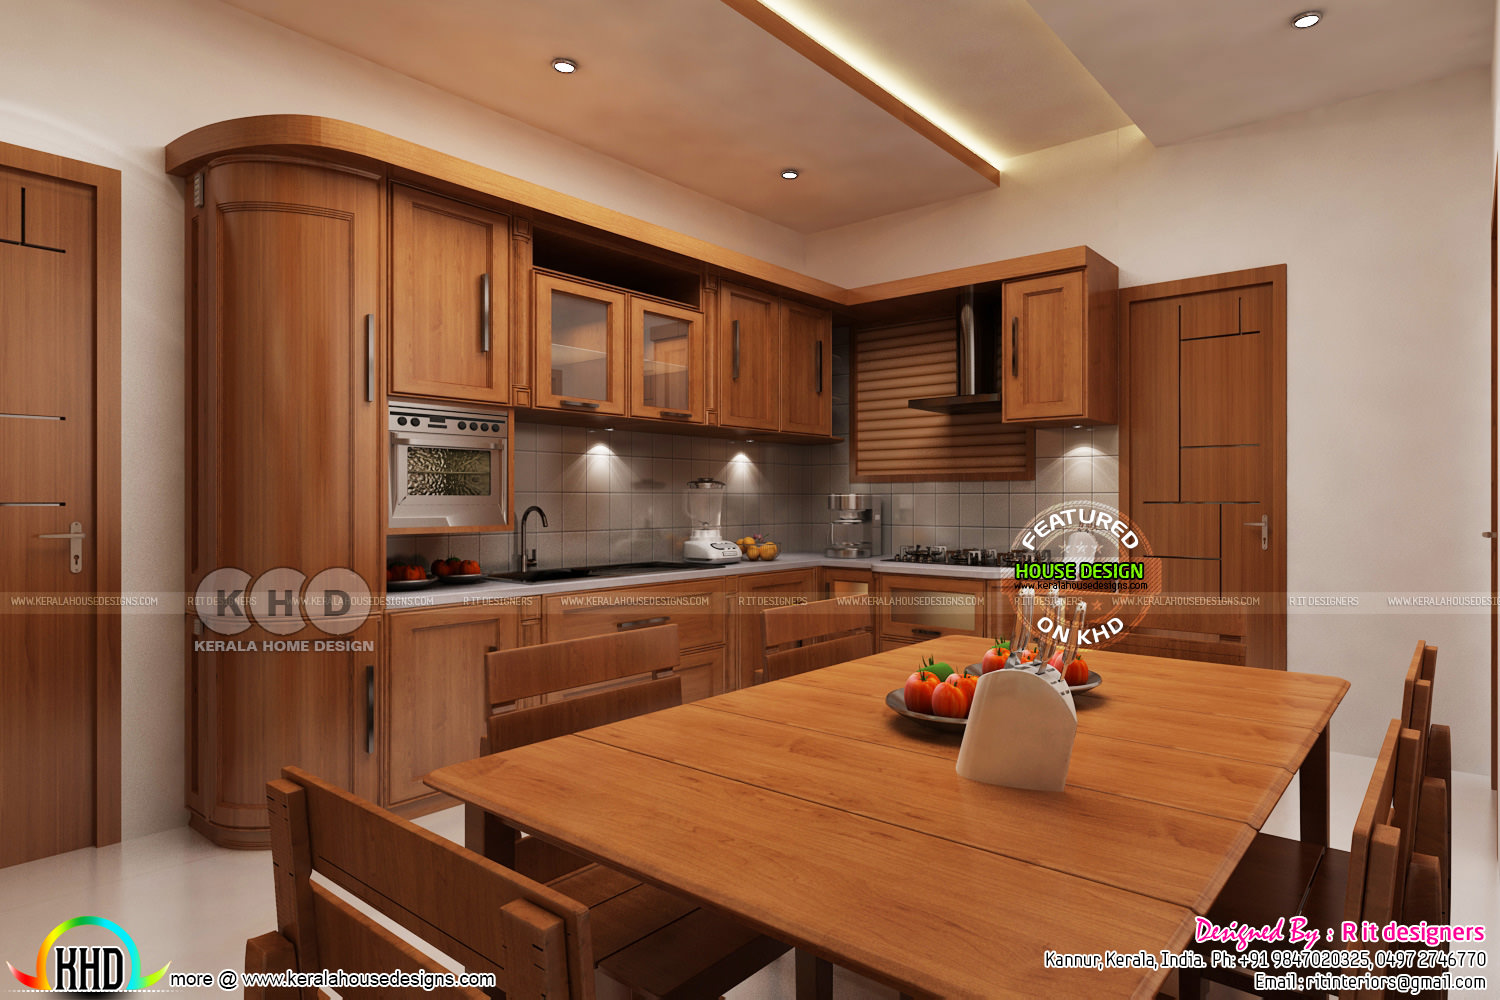 Dining, kitchen interior designs - Kerala home design and floor plans